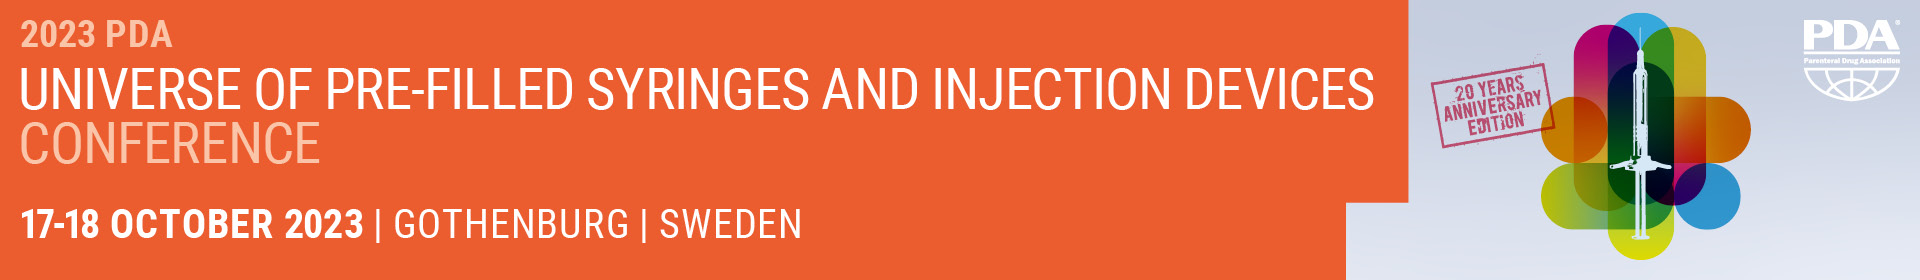 2023 PDA Universe of Pre-Filled Syringes and Injection Devices Conference Event Banner